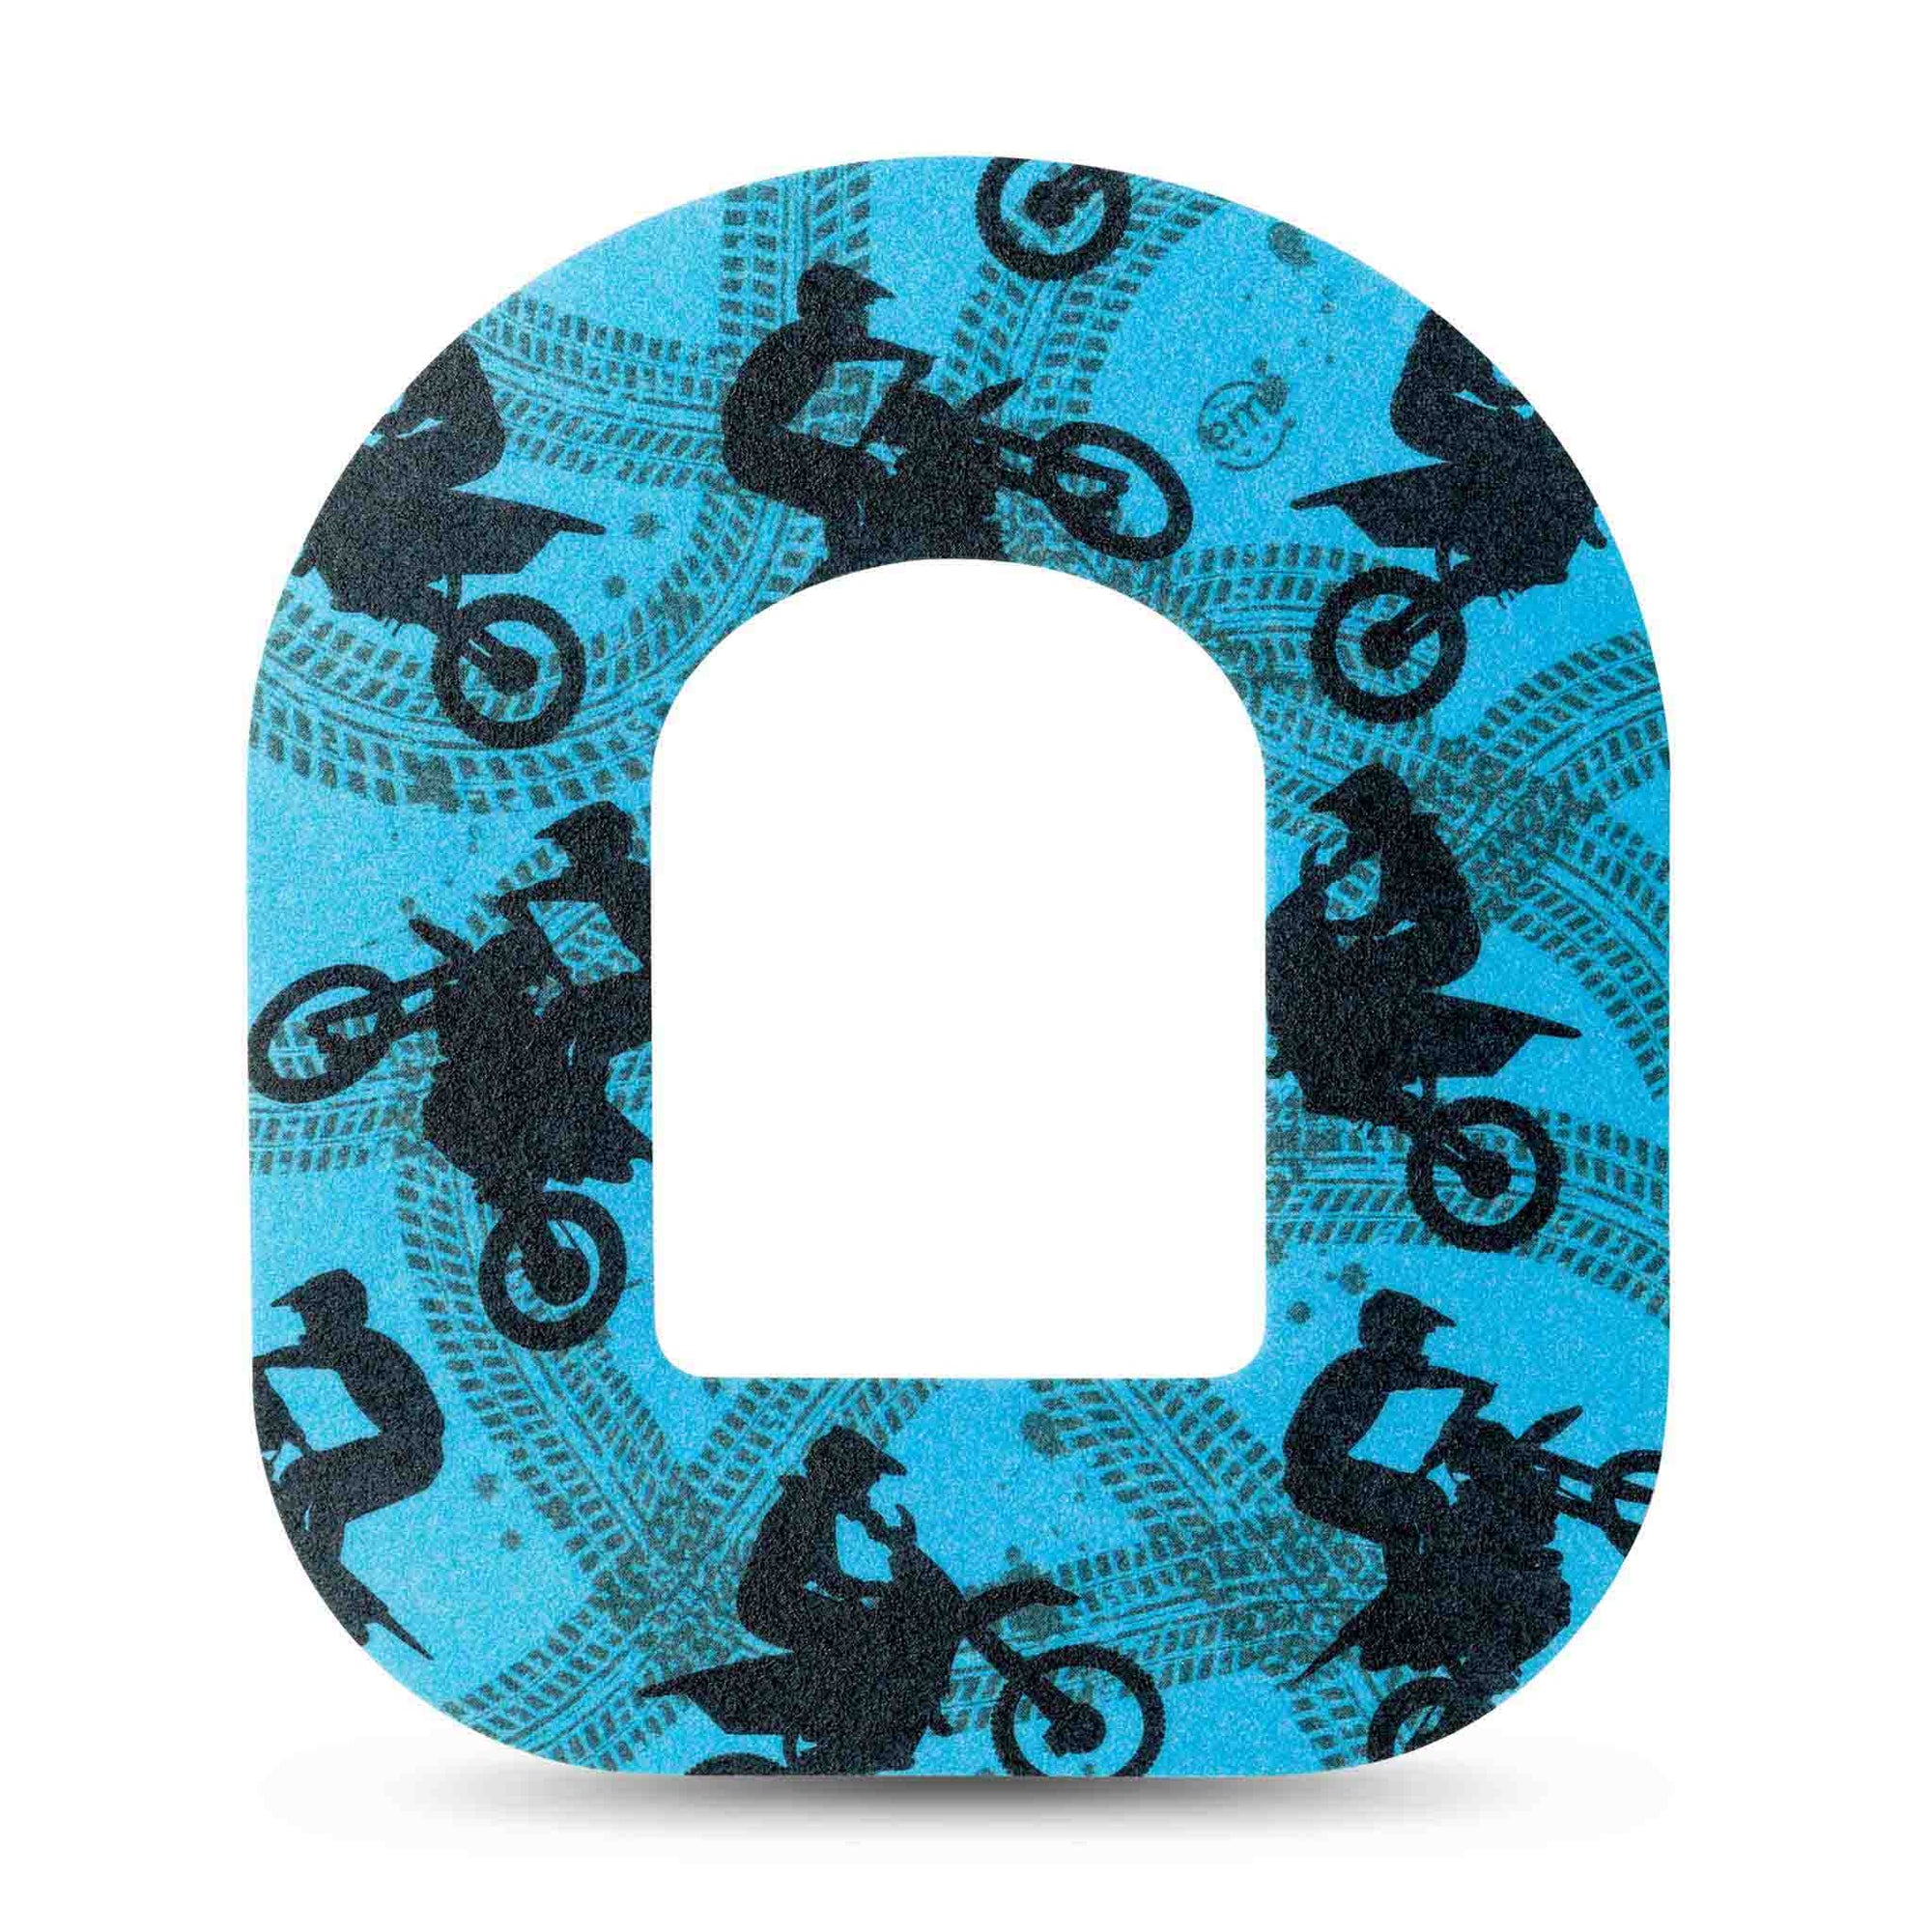 ExpressionMed Dirt Bikes Blue Pod Patch